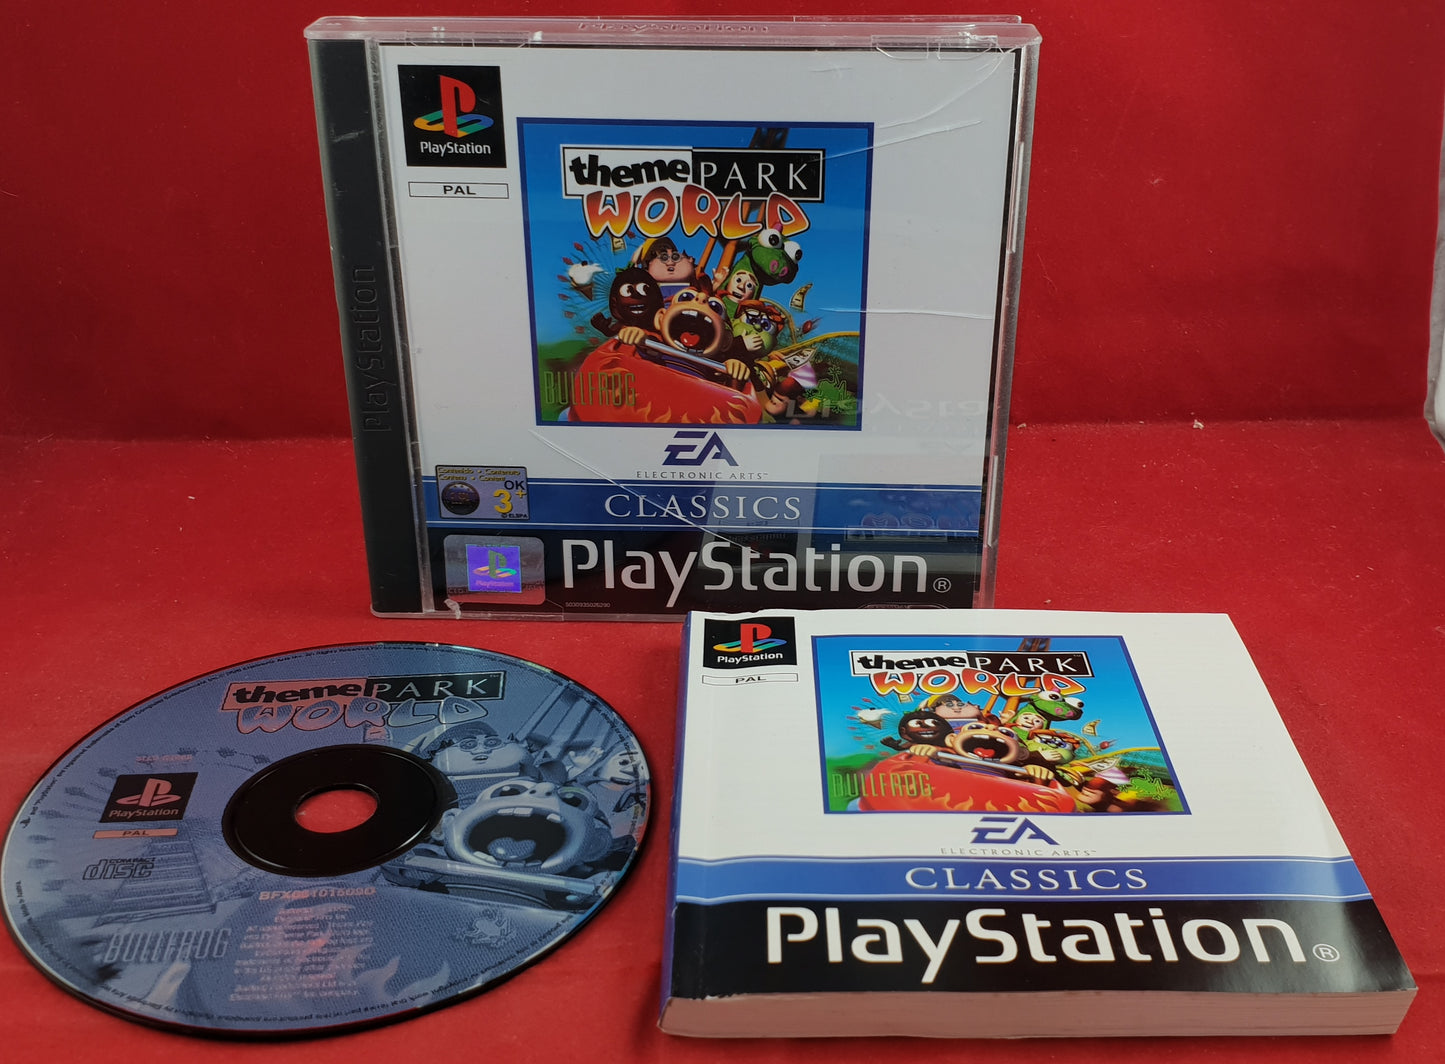 Theme Park World Classics Sony Playstation 1 (PS1) Game